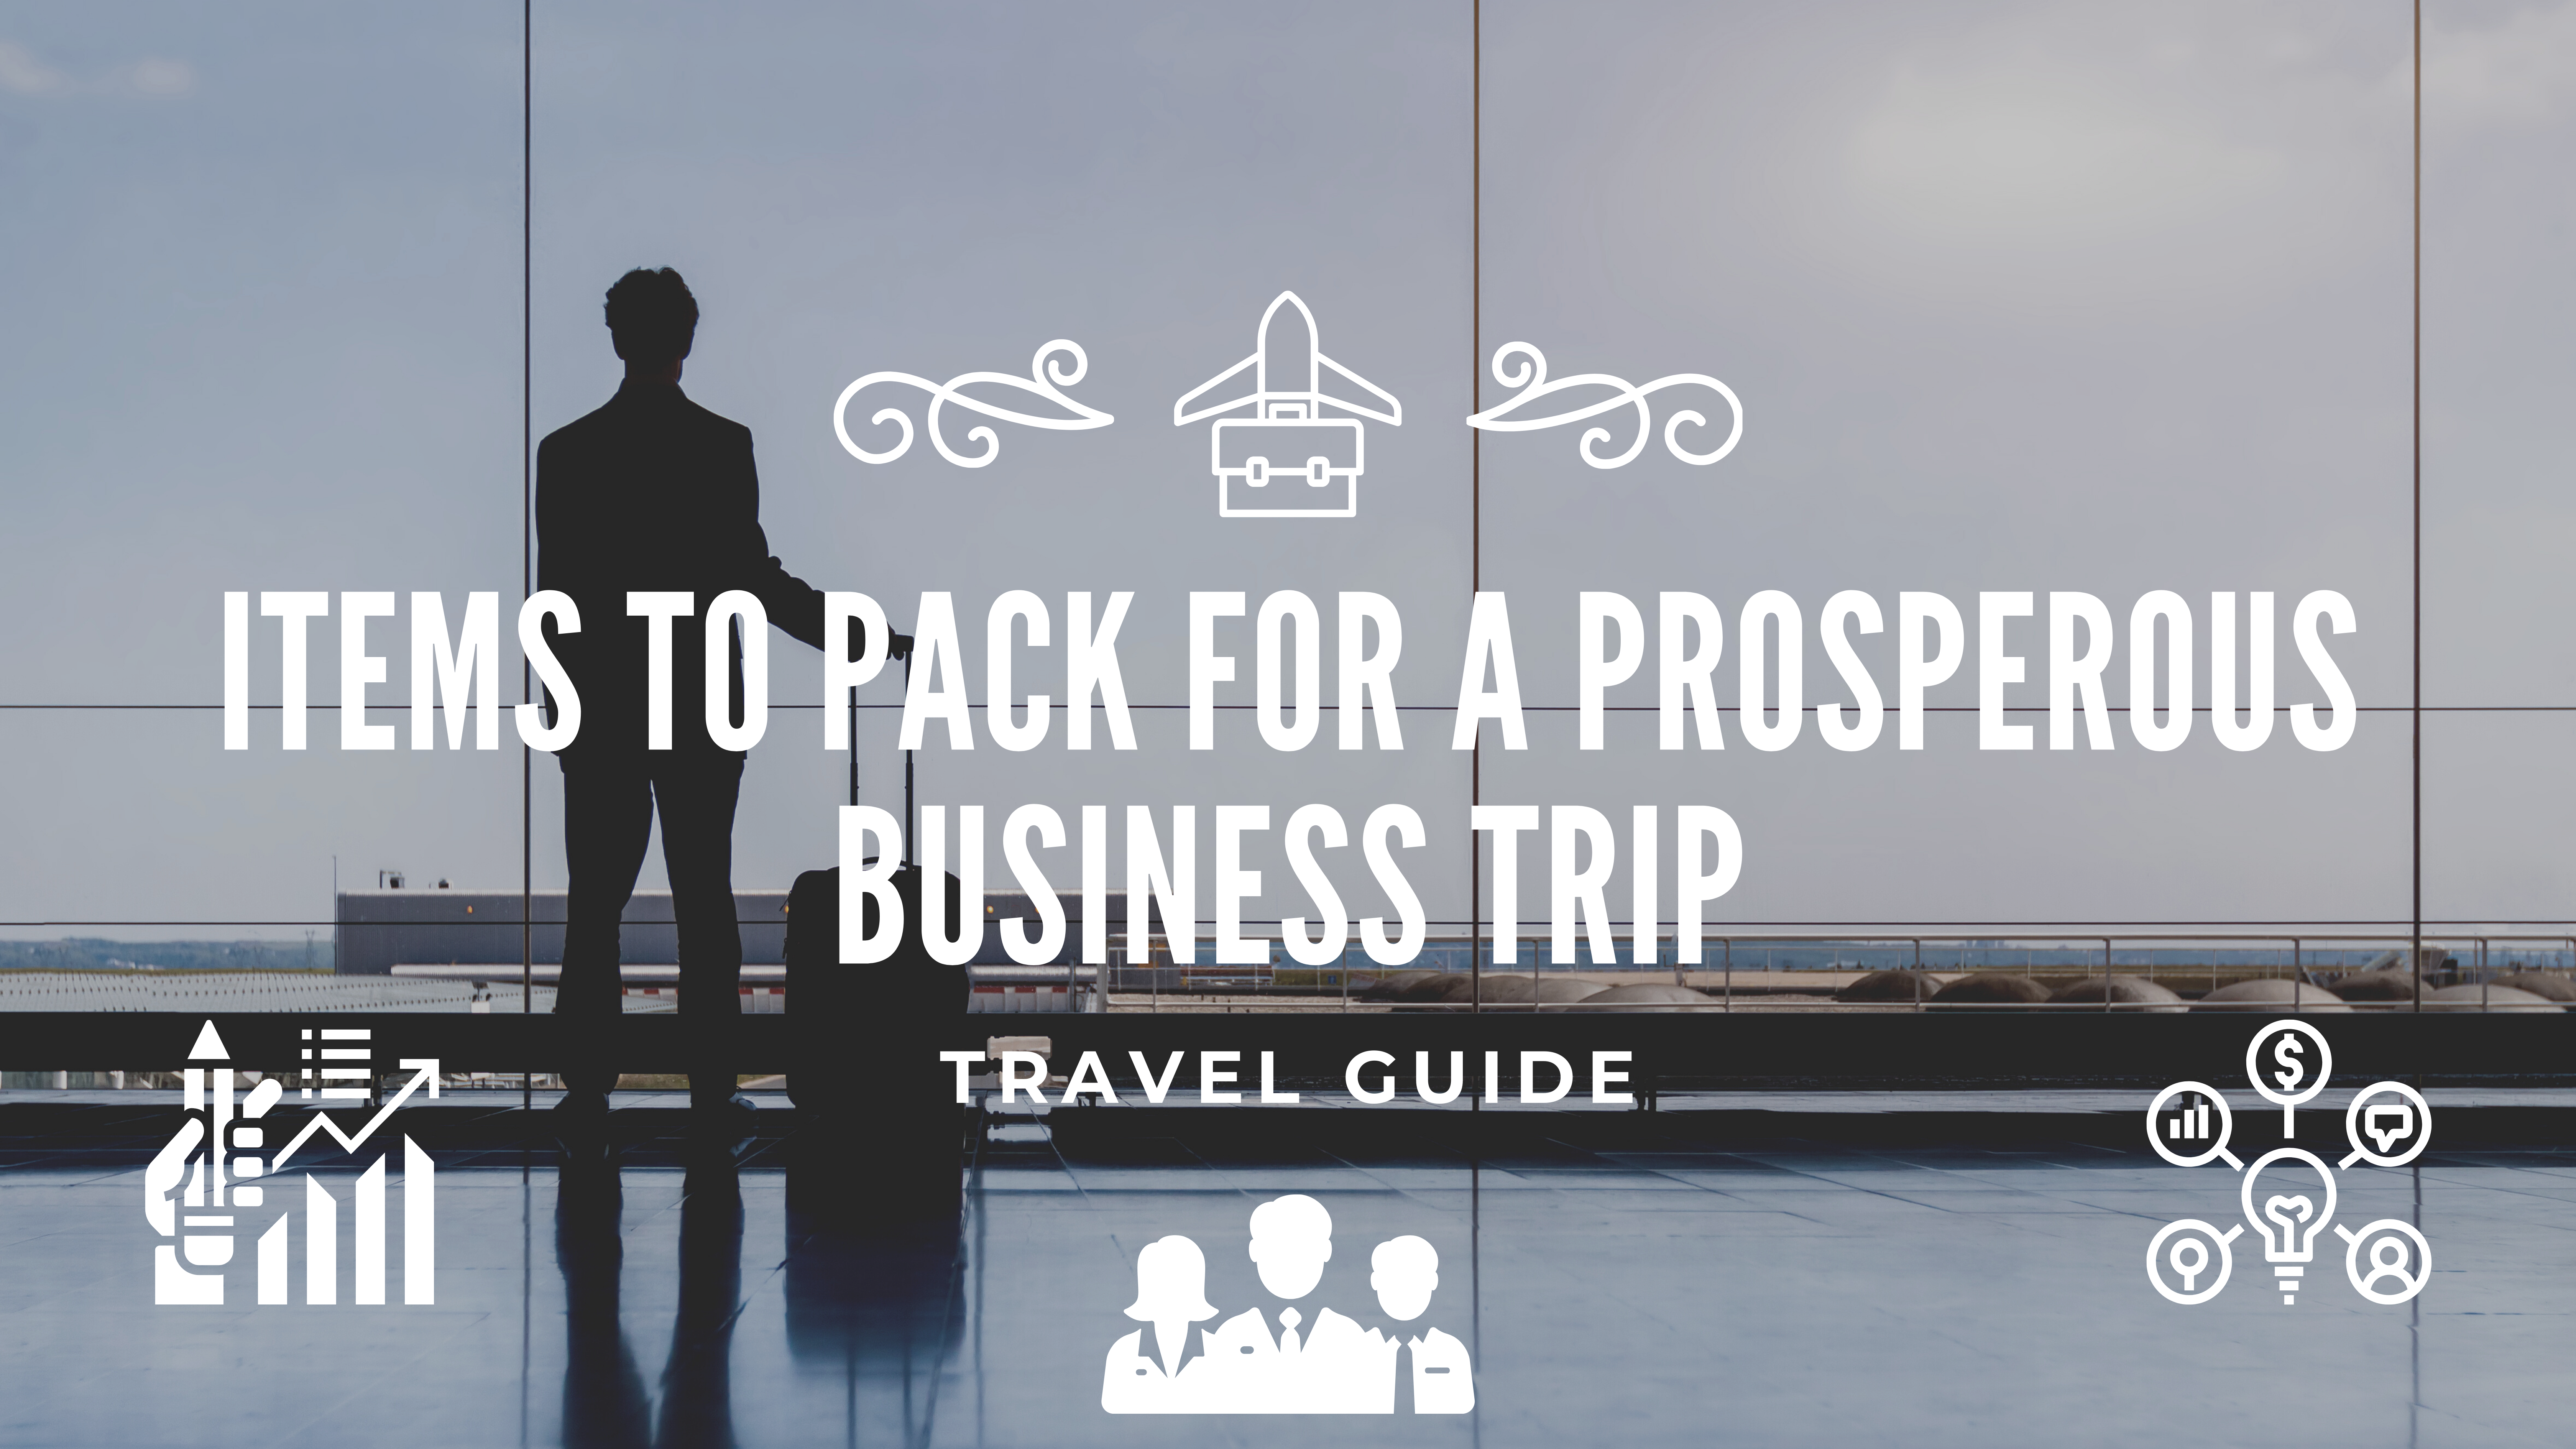 Items to pack for a prosperous business trip